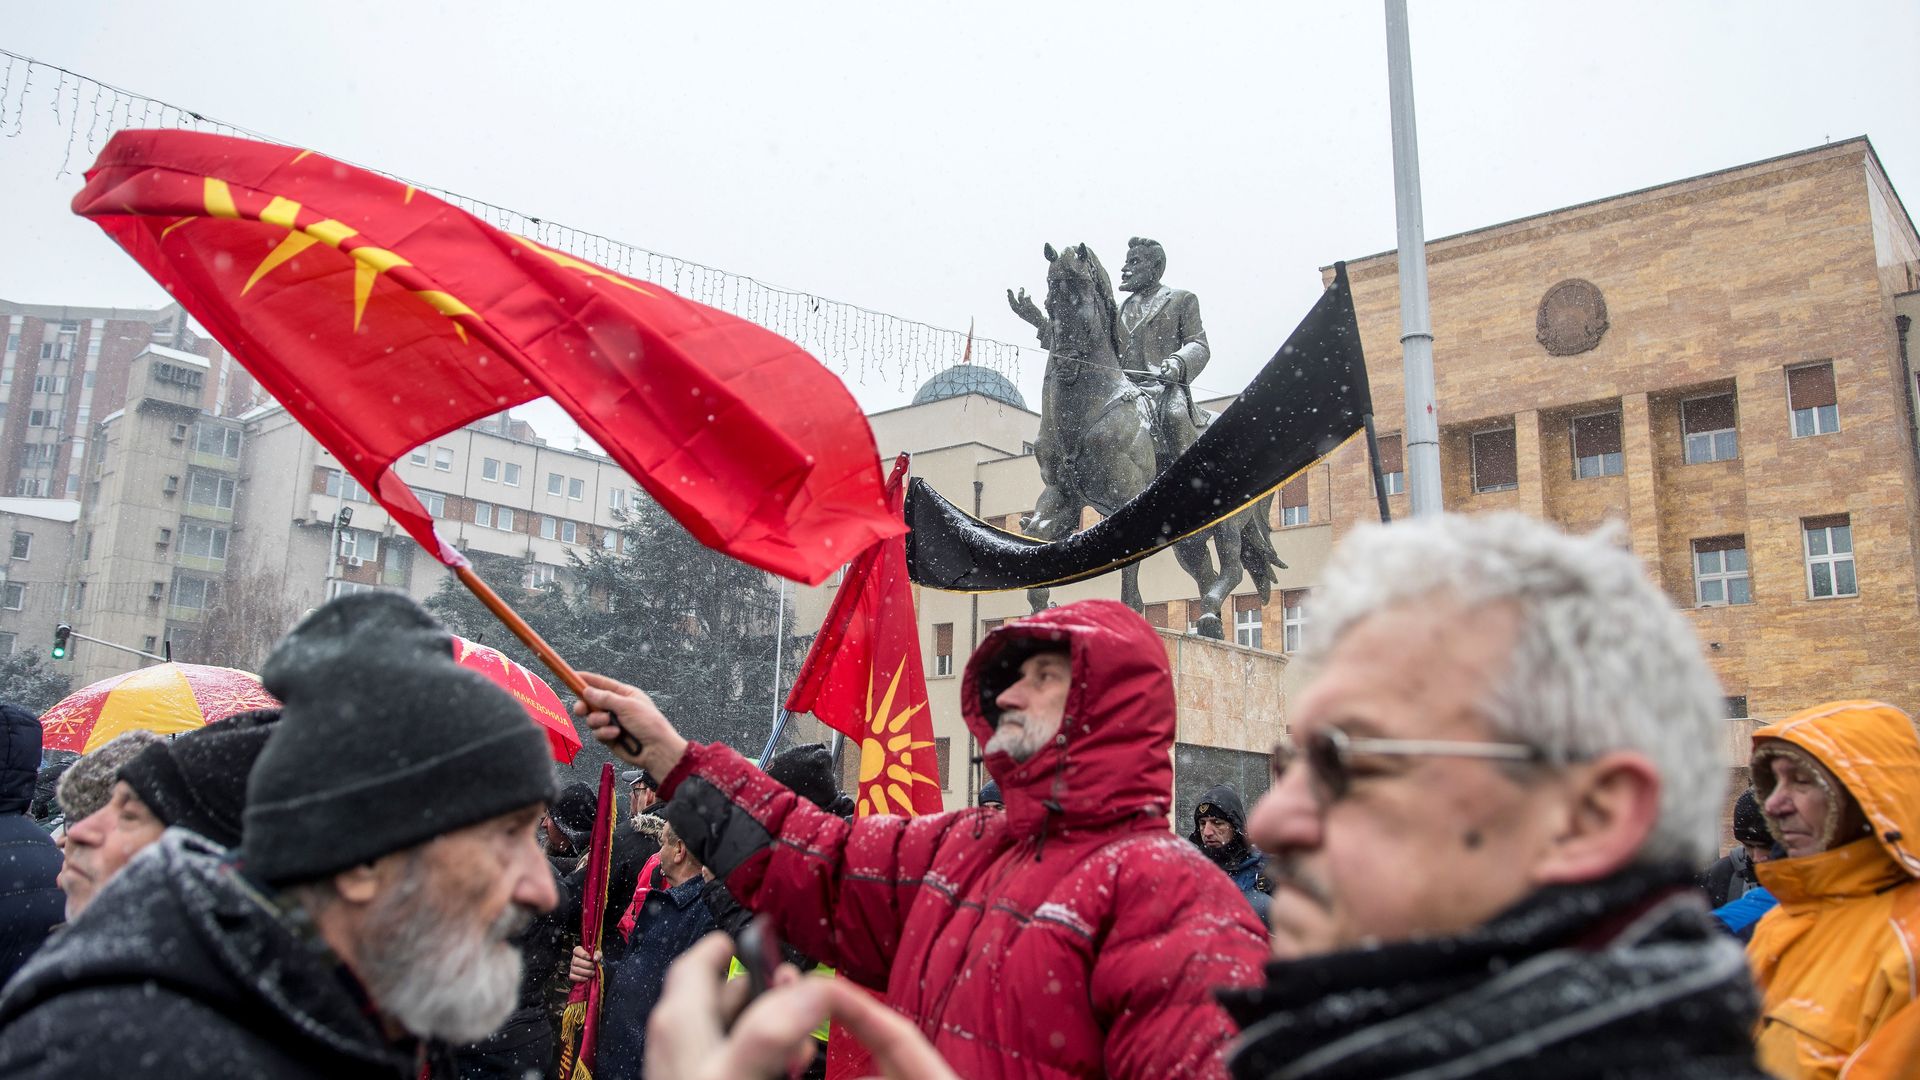 A demonstrator waves the old Macedonian flag during a protest against a process of renaming the country's name in front of the Parliament building.